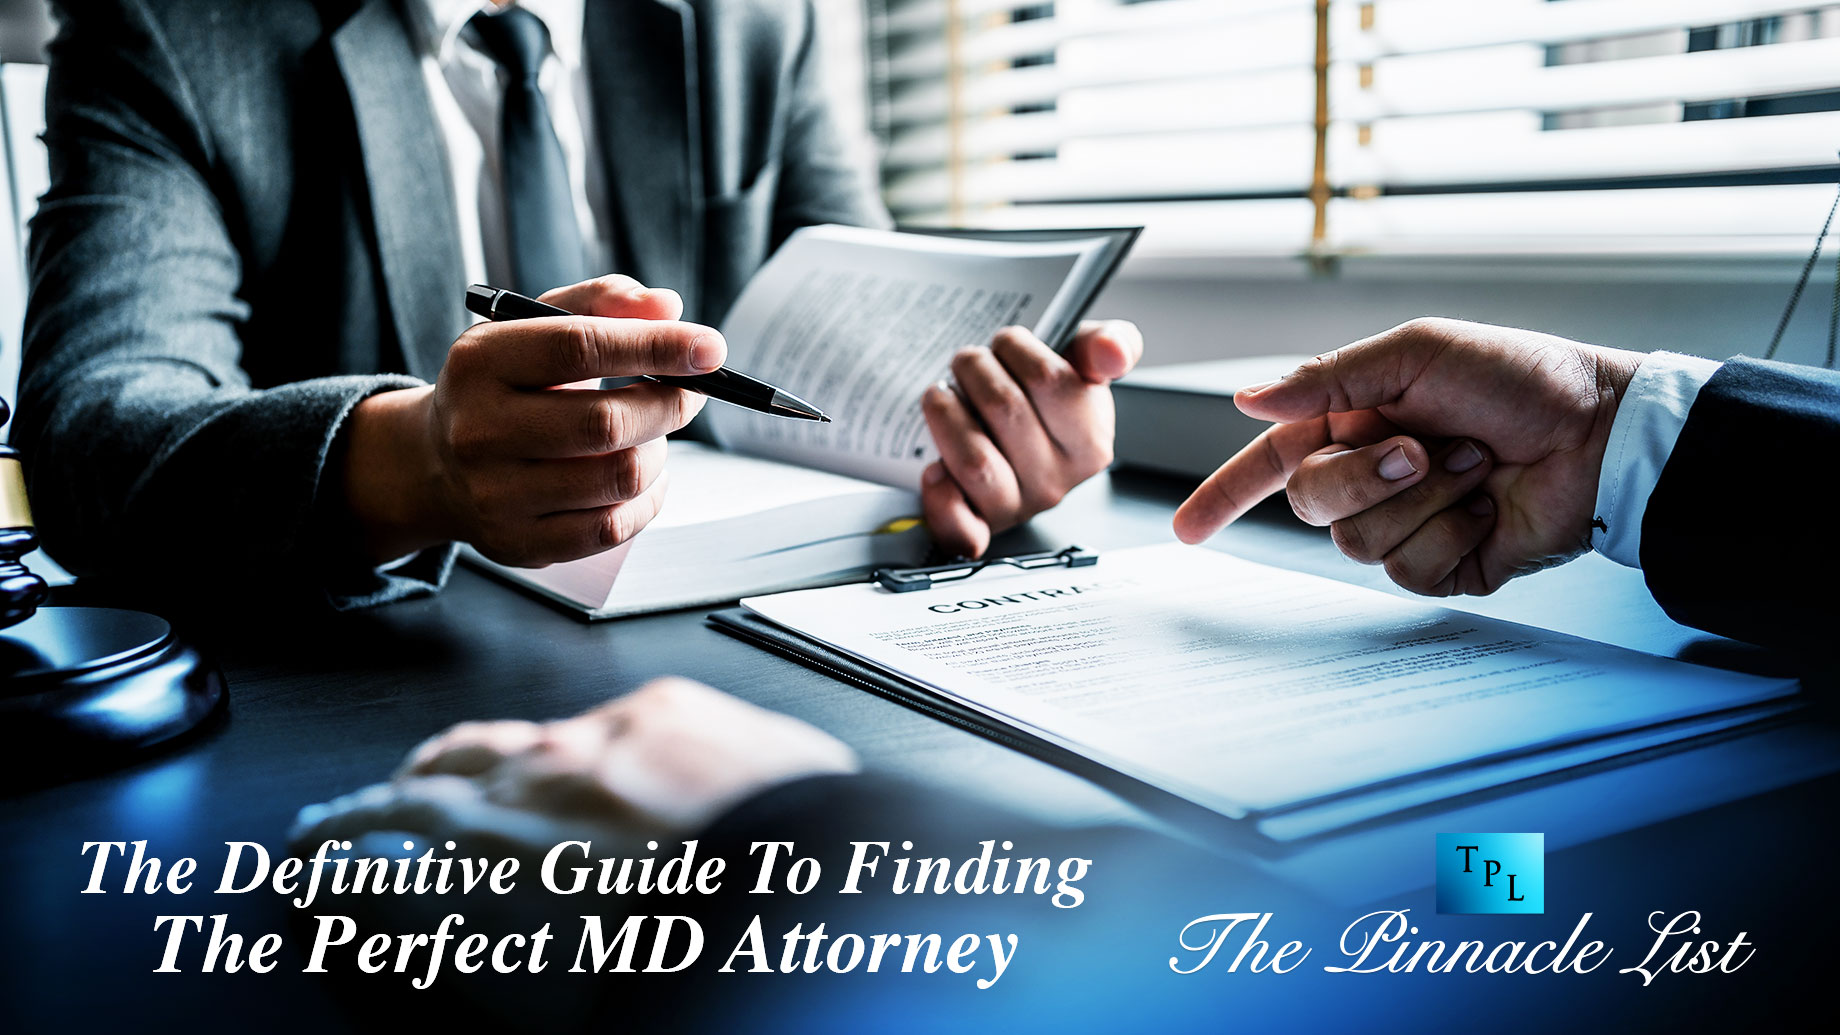 The Definitive Guide To Finding The Perfect MD Attorney: Exploring The Role Of An MD Attorney